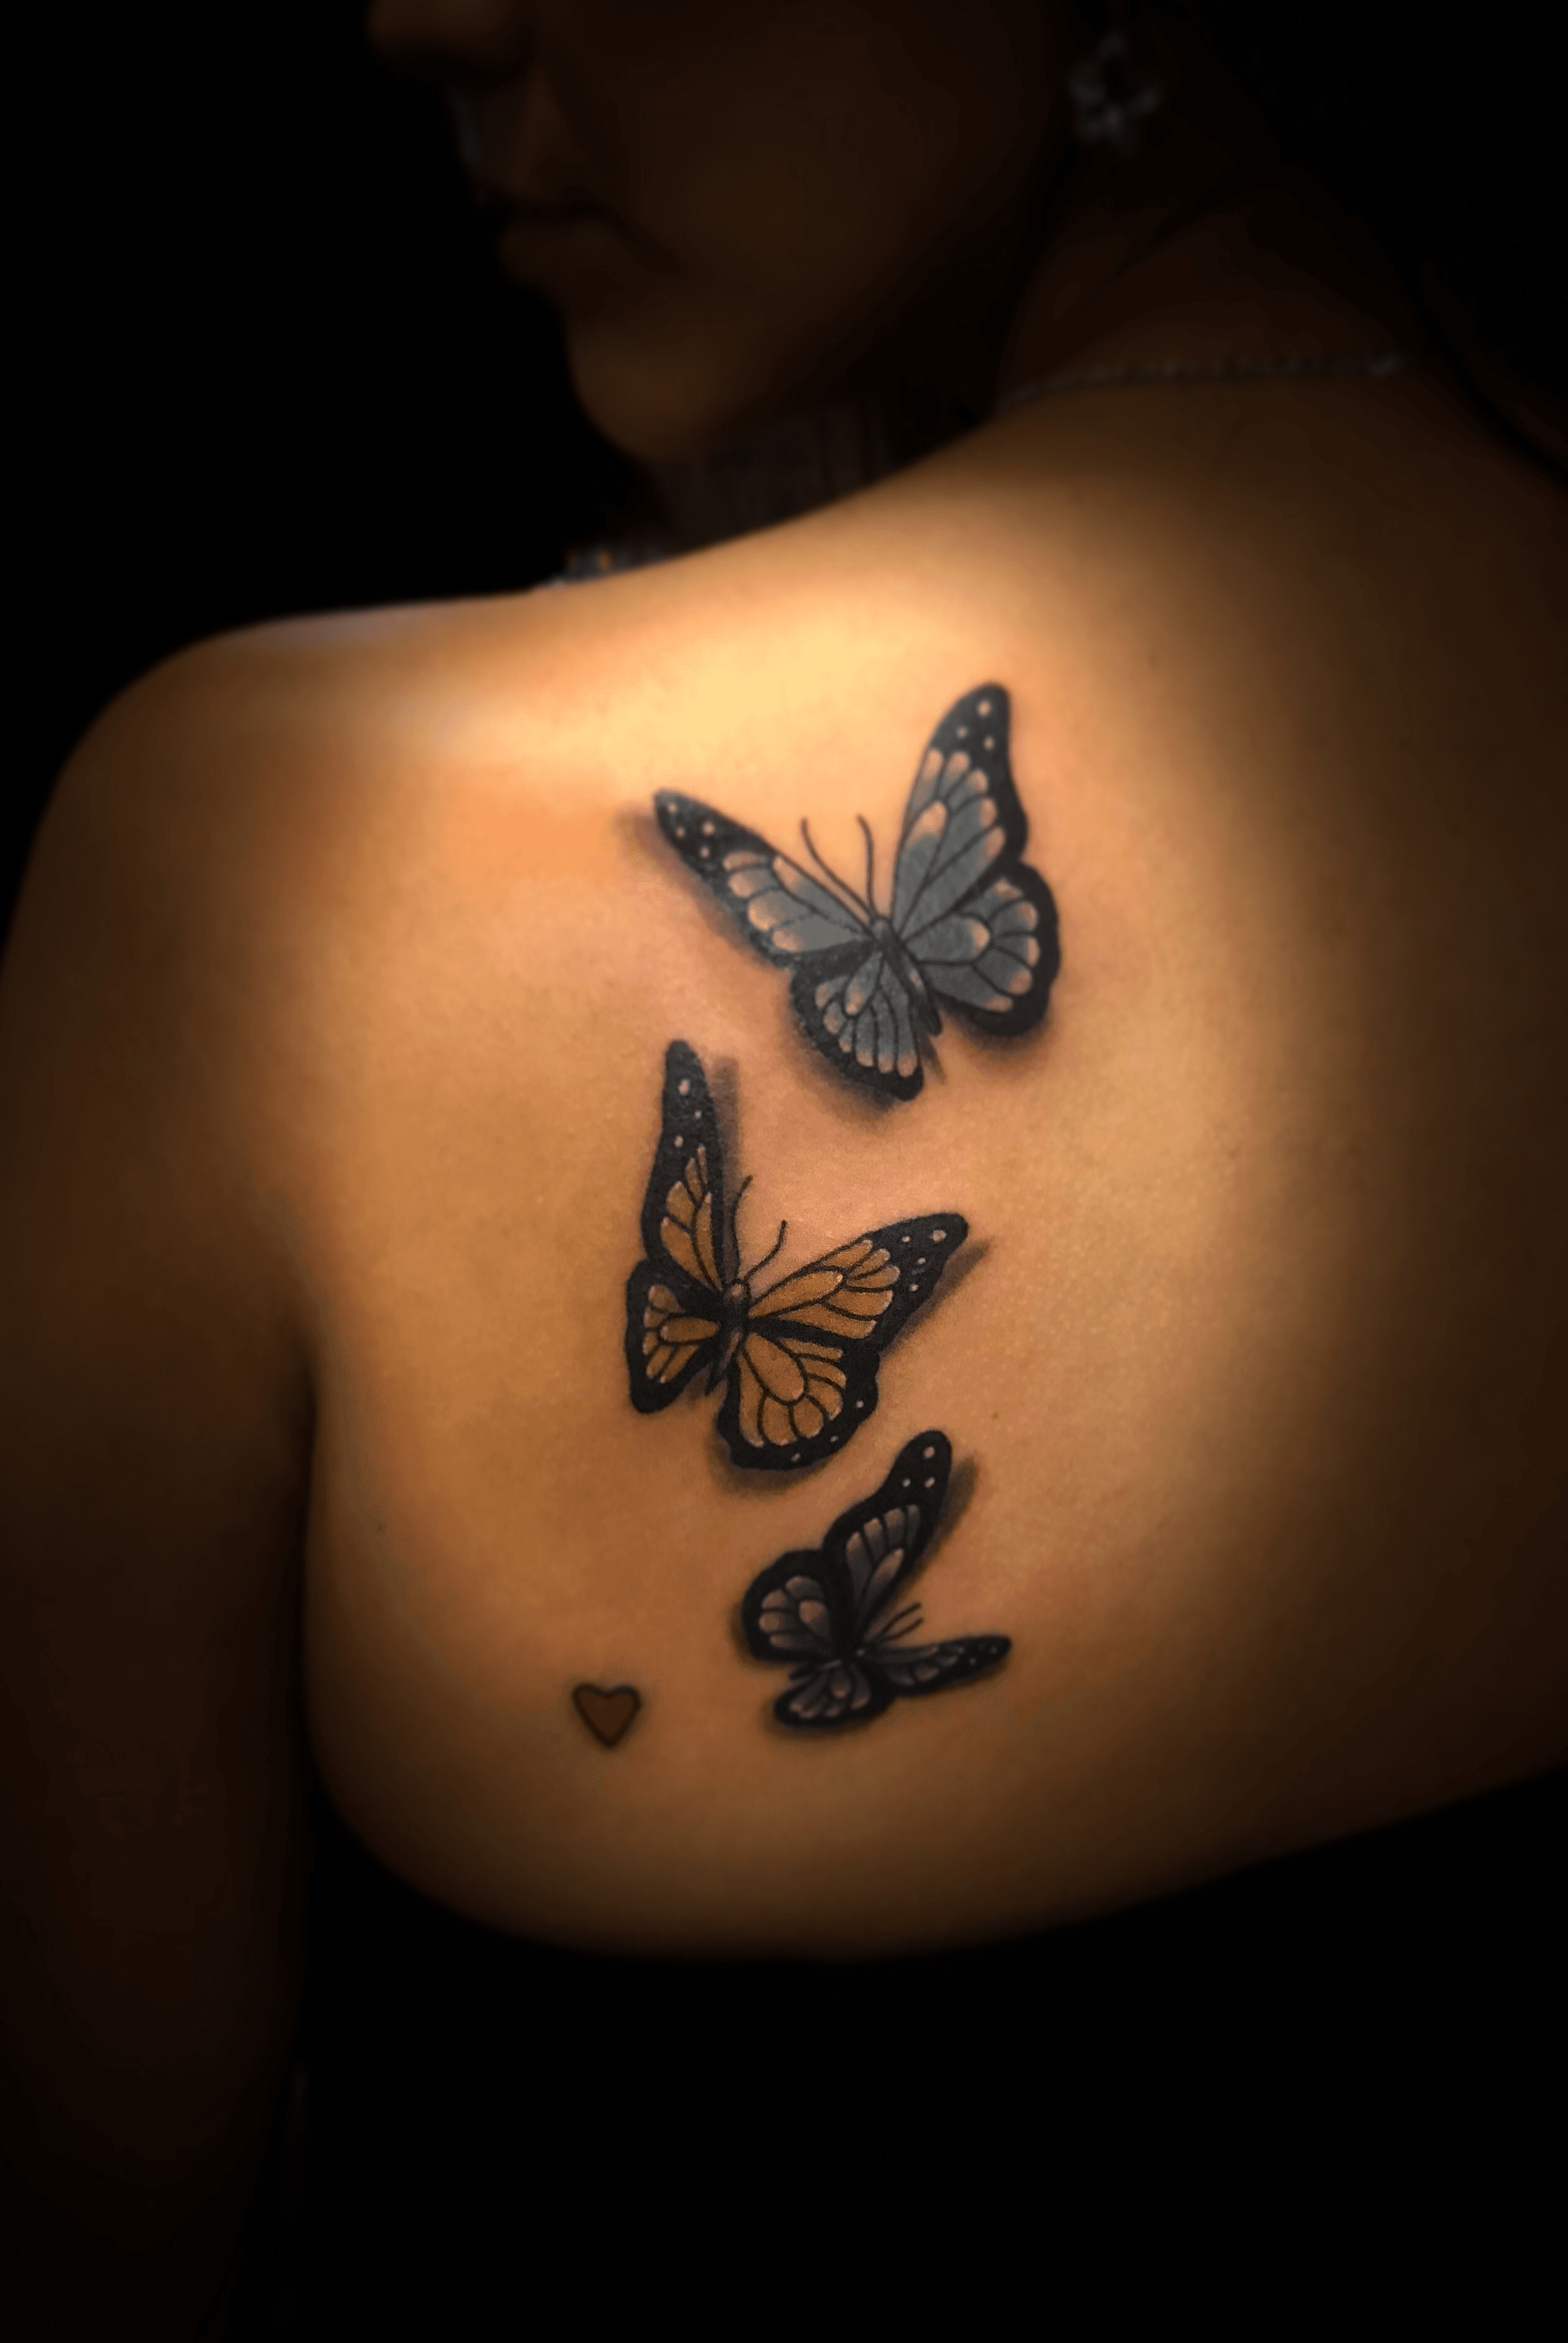 15 Amazingly Beautiful Butterfly Tattoos  Tattoo for a week